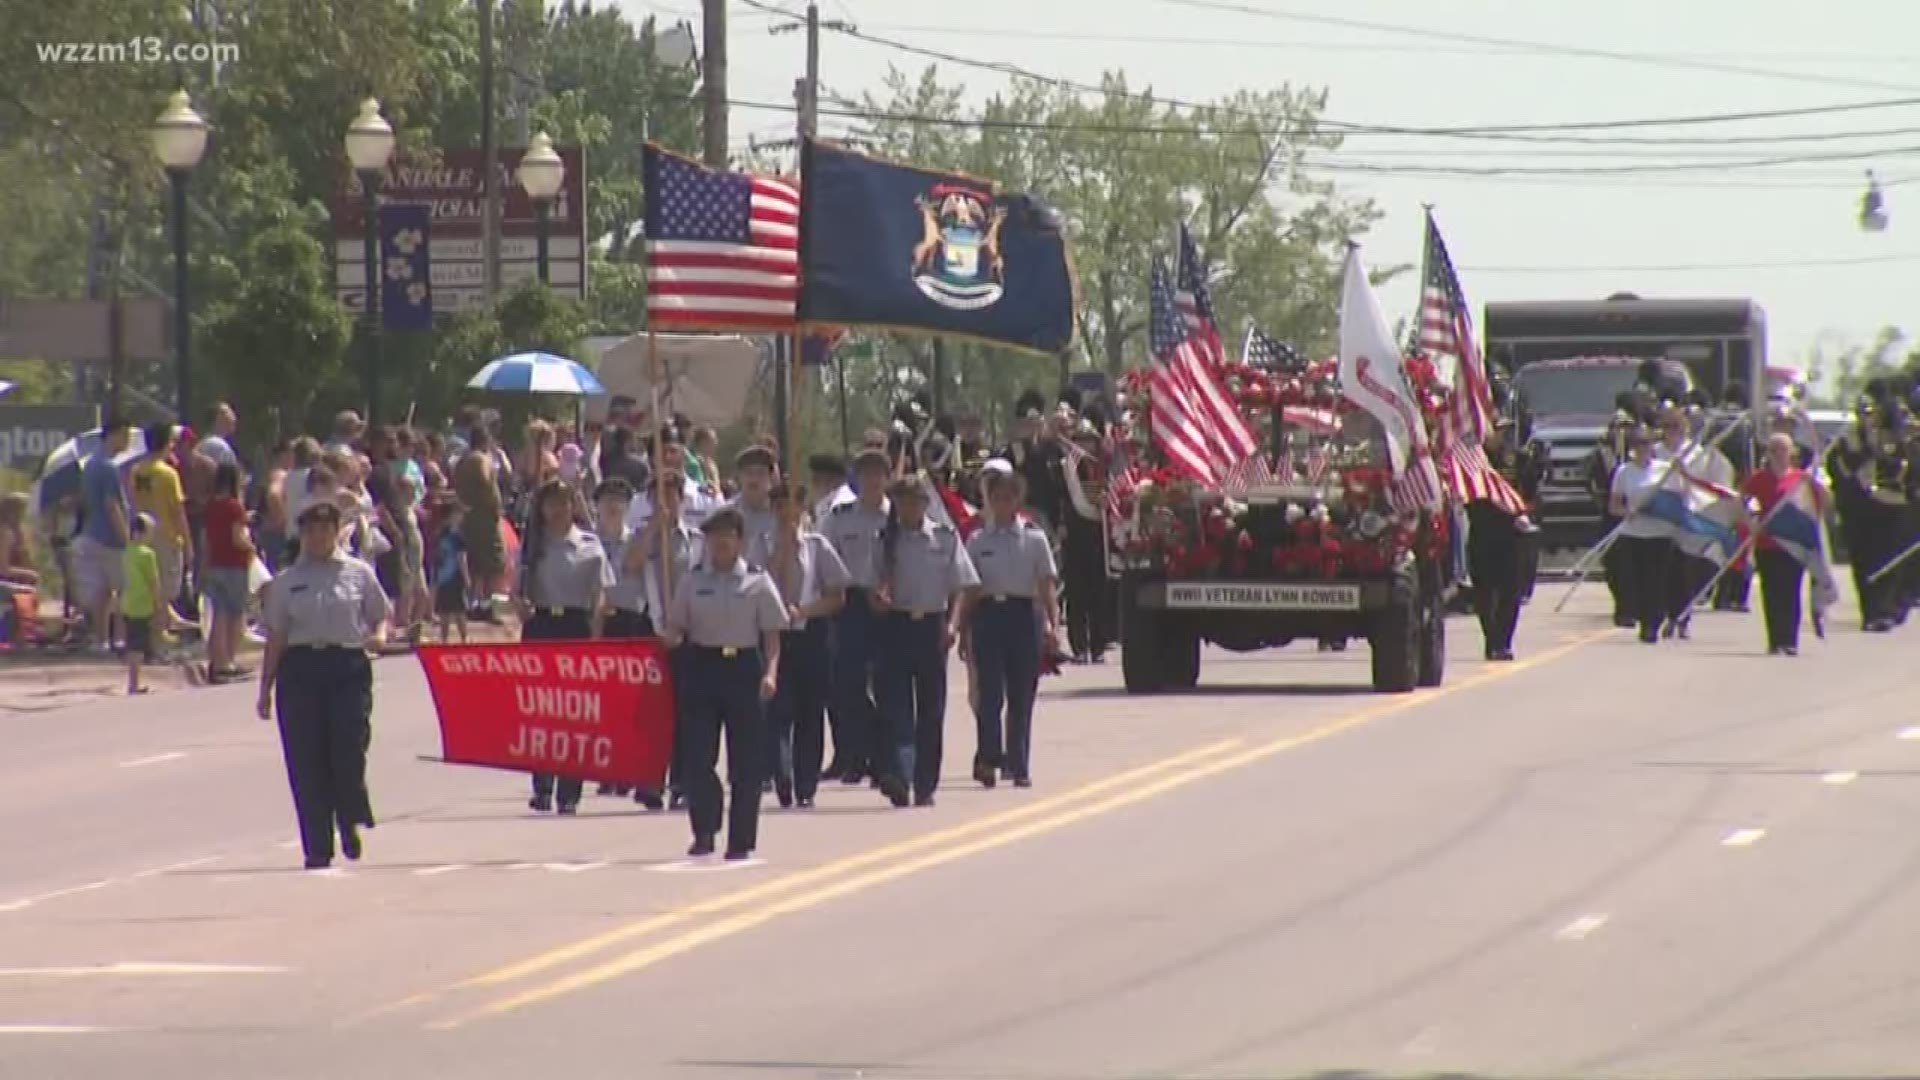 Several West Michigan communities will host Memorial Day ceremonies and parades to honor those who have served our country.